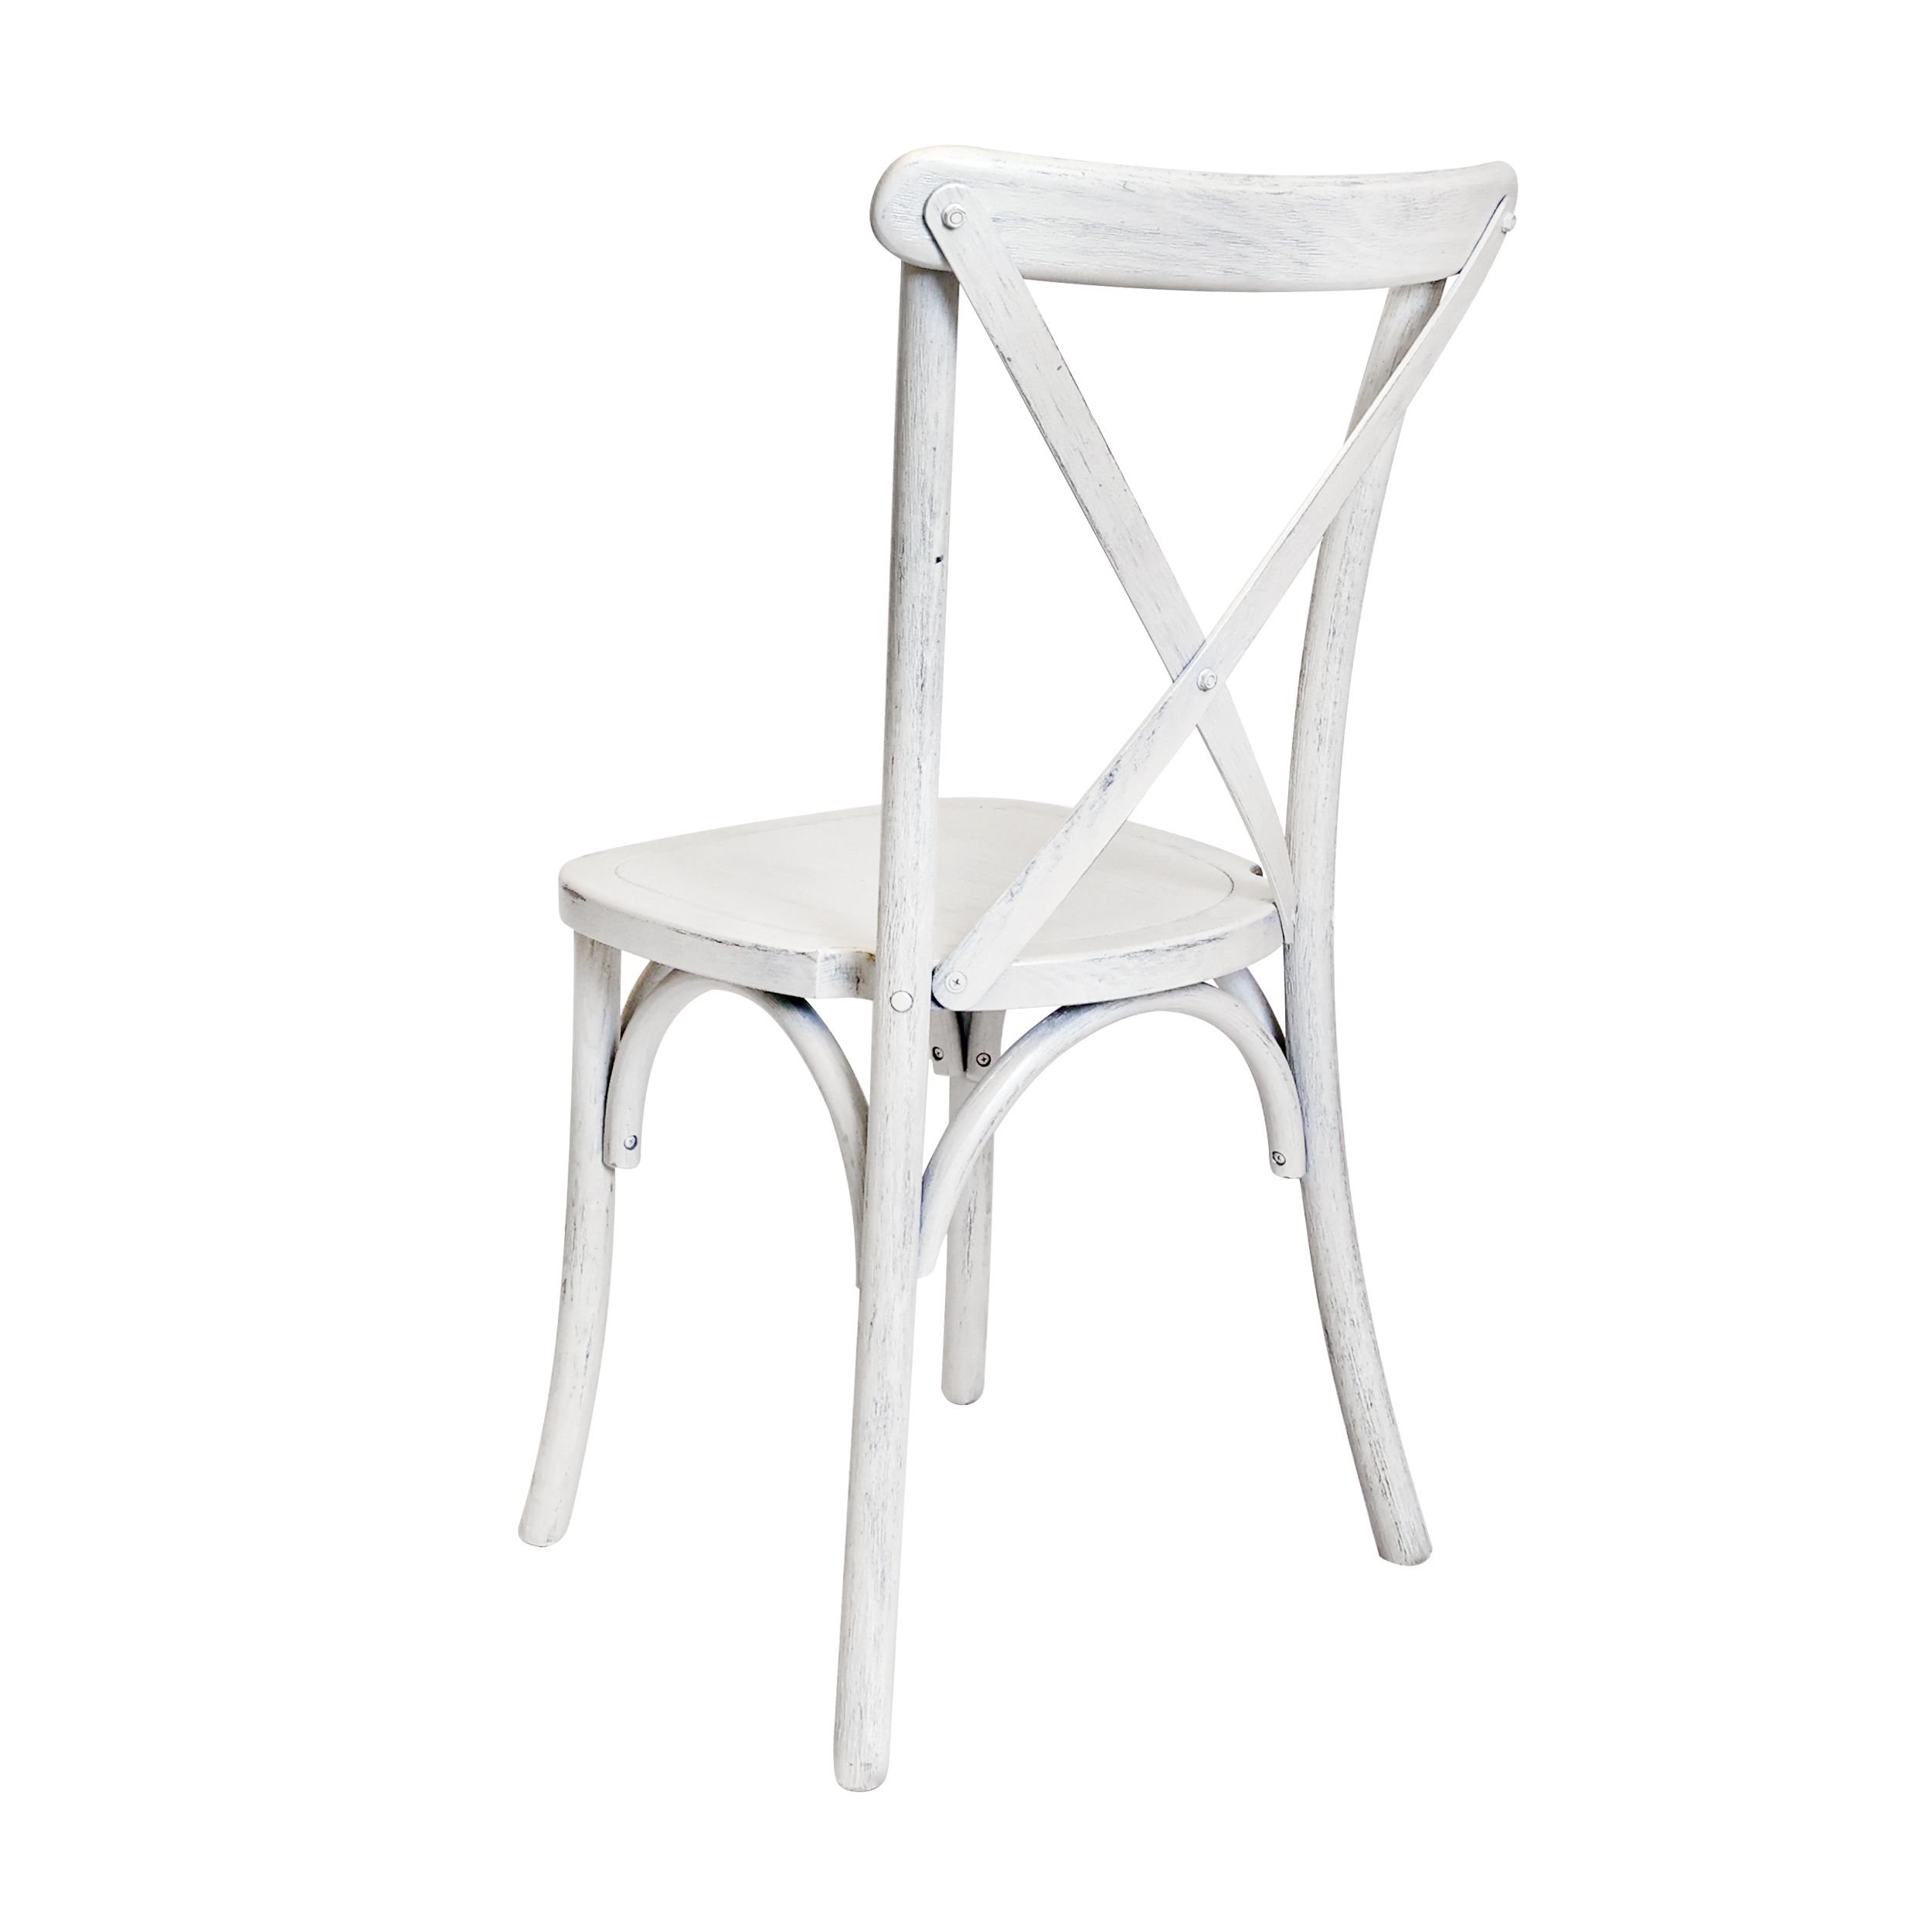 Chair Crossback Wood White Distressed Z Series CXWWD ZG T Back